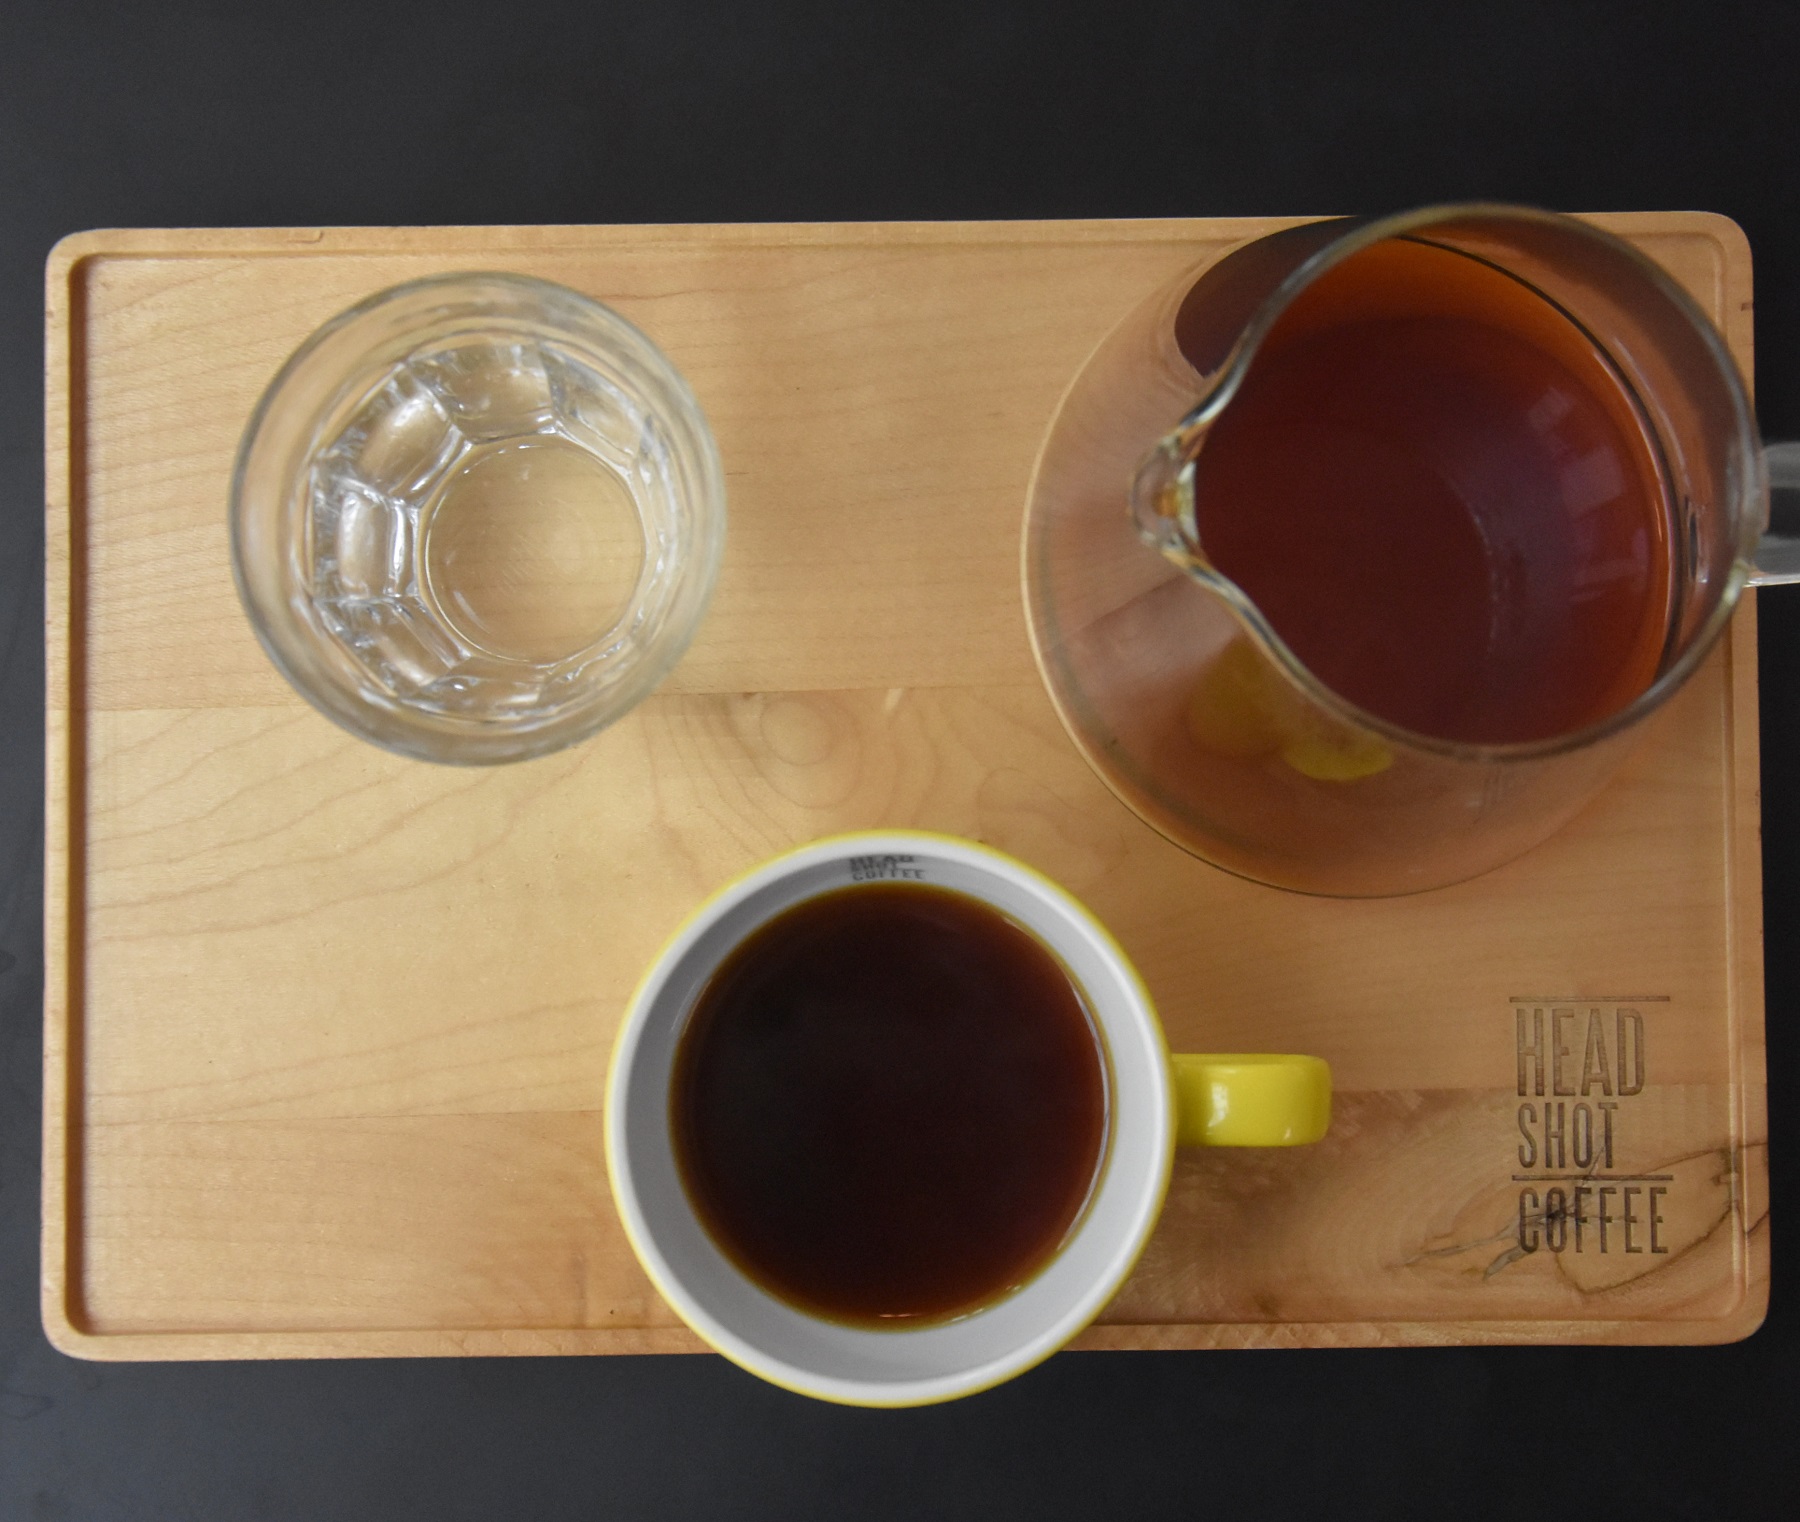 A V60 of a Kenyan single-origin served by Head Shot Coffee in a carafe on a wooden tray, with the cup of the side, along with a glass of water.